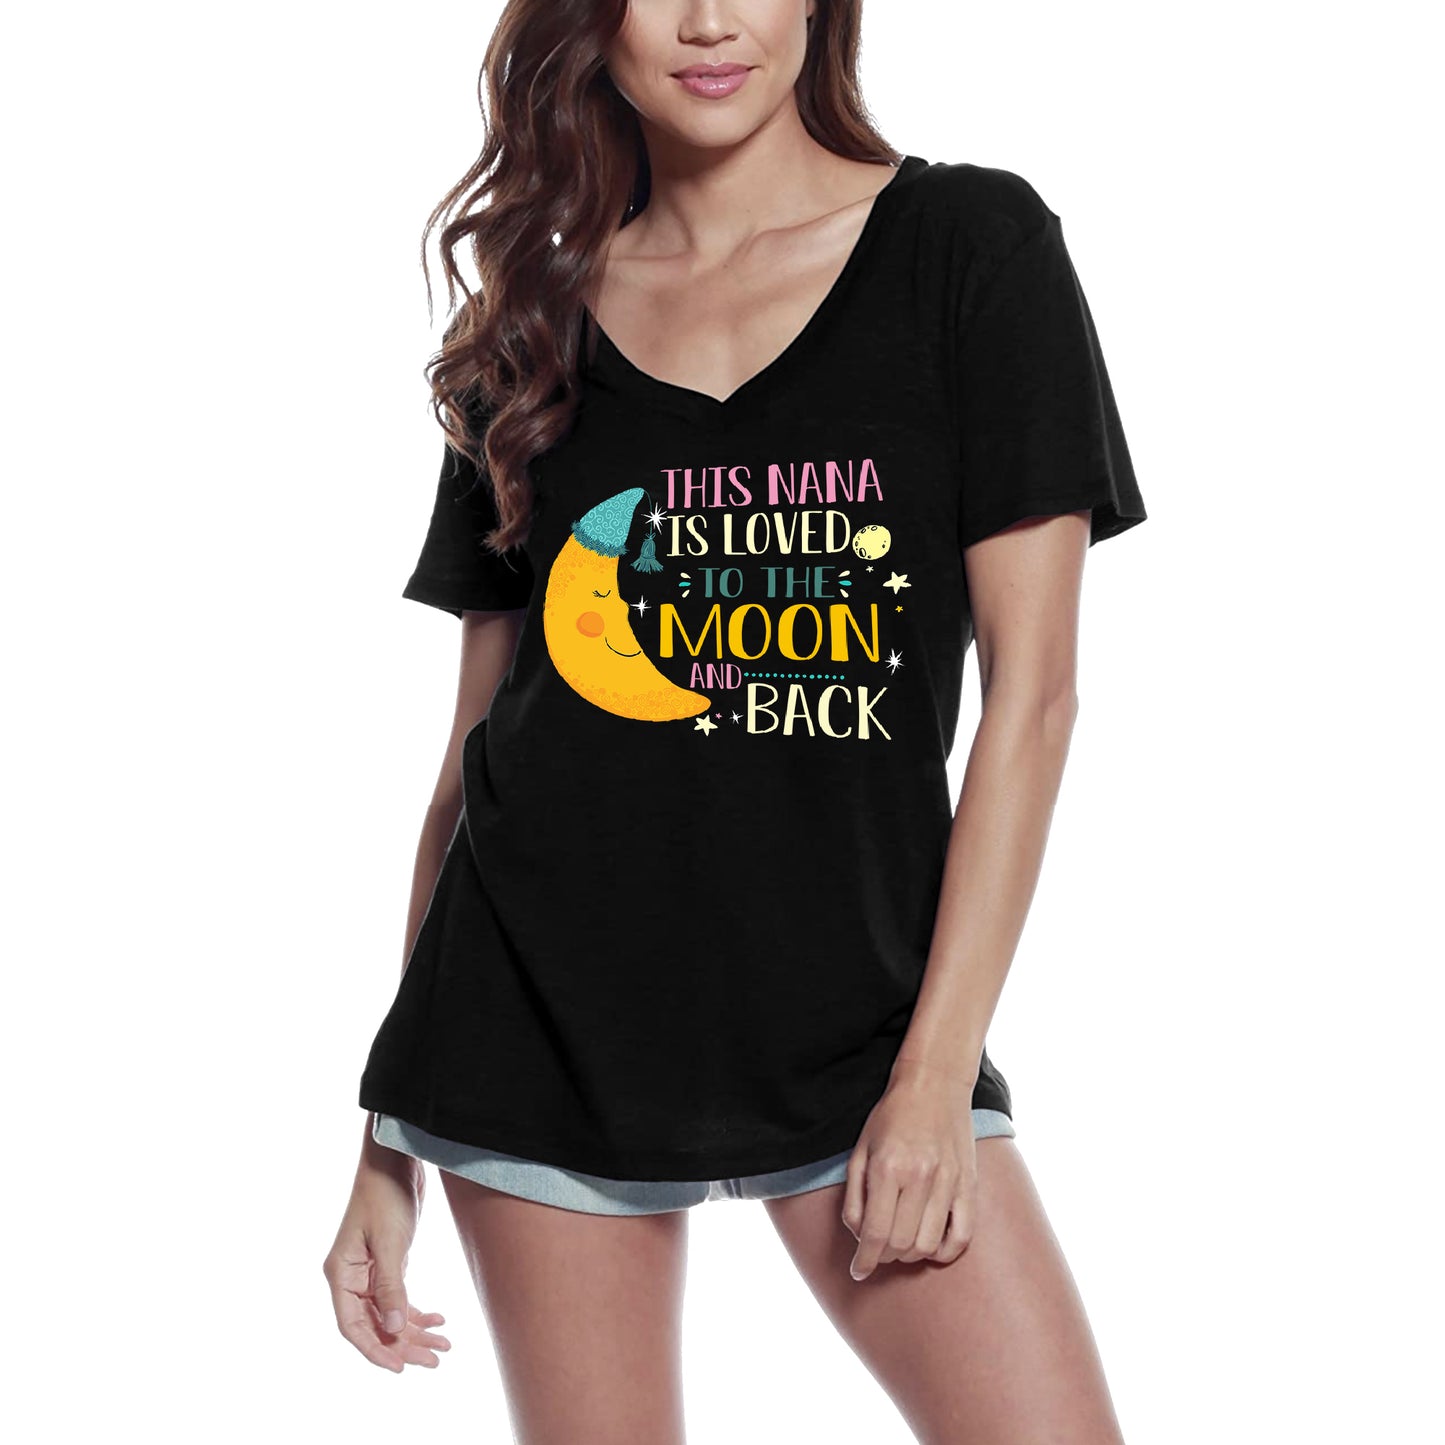 ULTRABASIC Damen-T-Shirt mit V-Ausschnitt „This Nana Is Loved To The Moon and Back“ – Lustiges Zitat